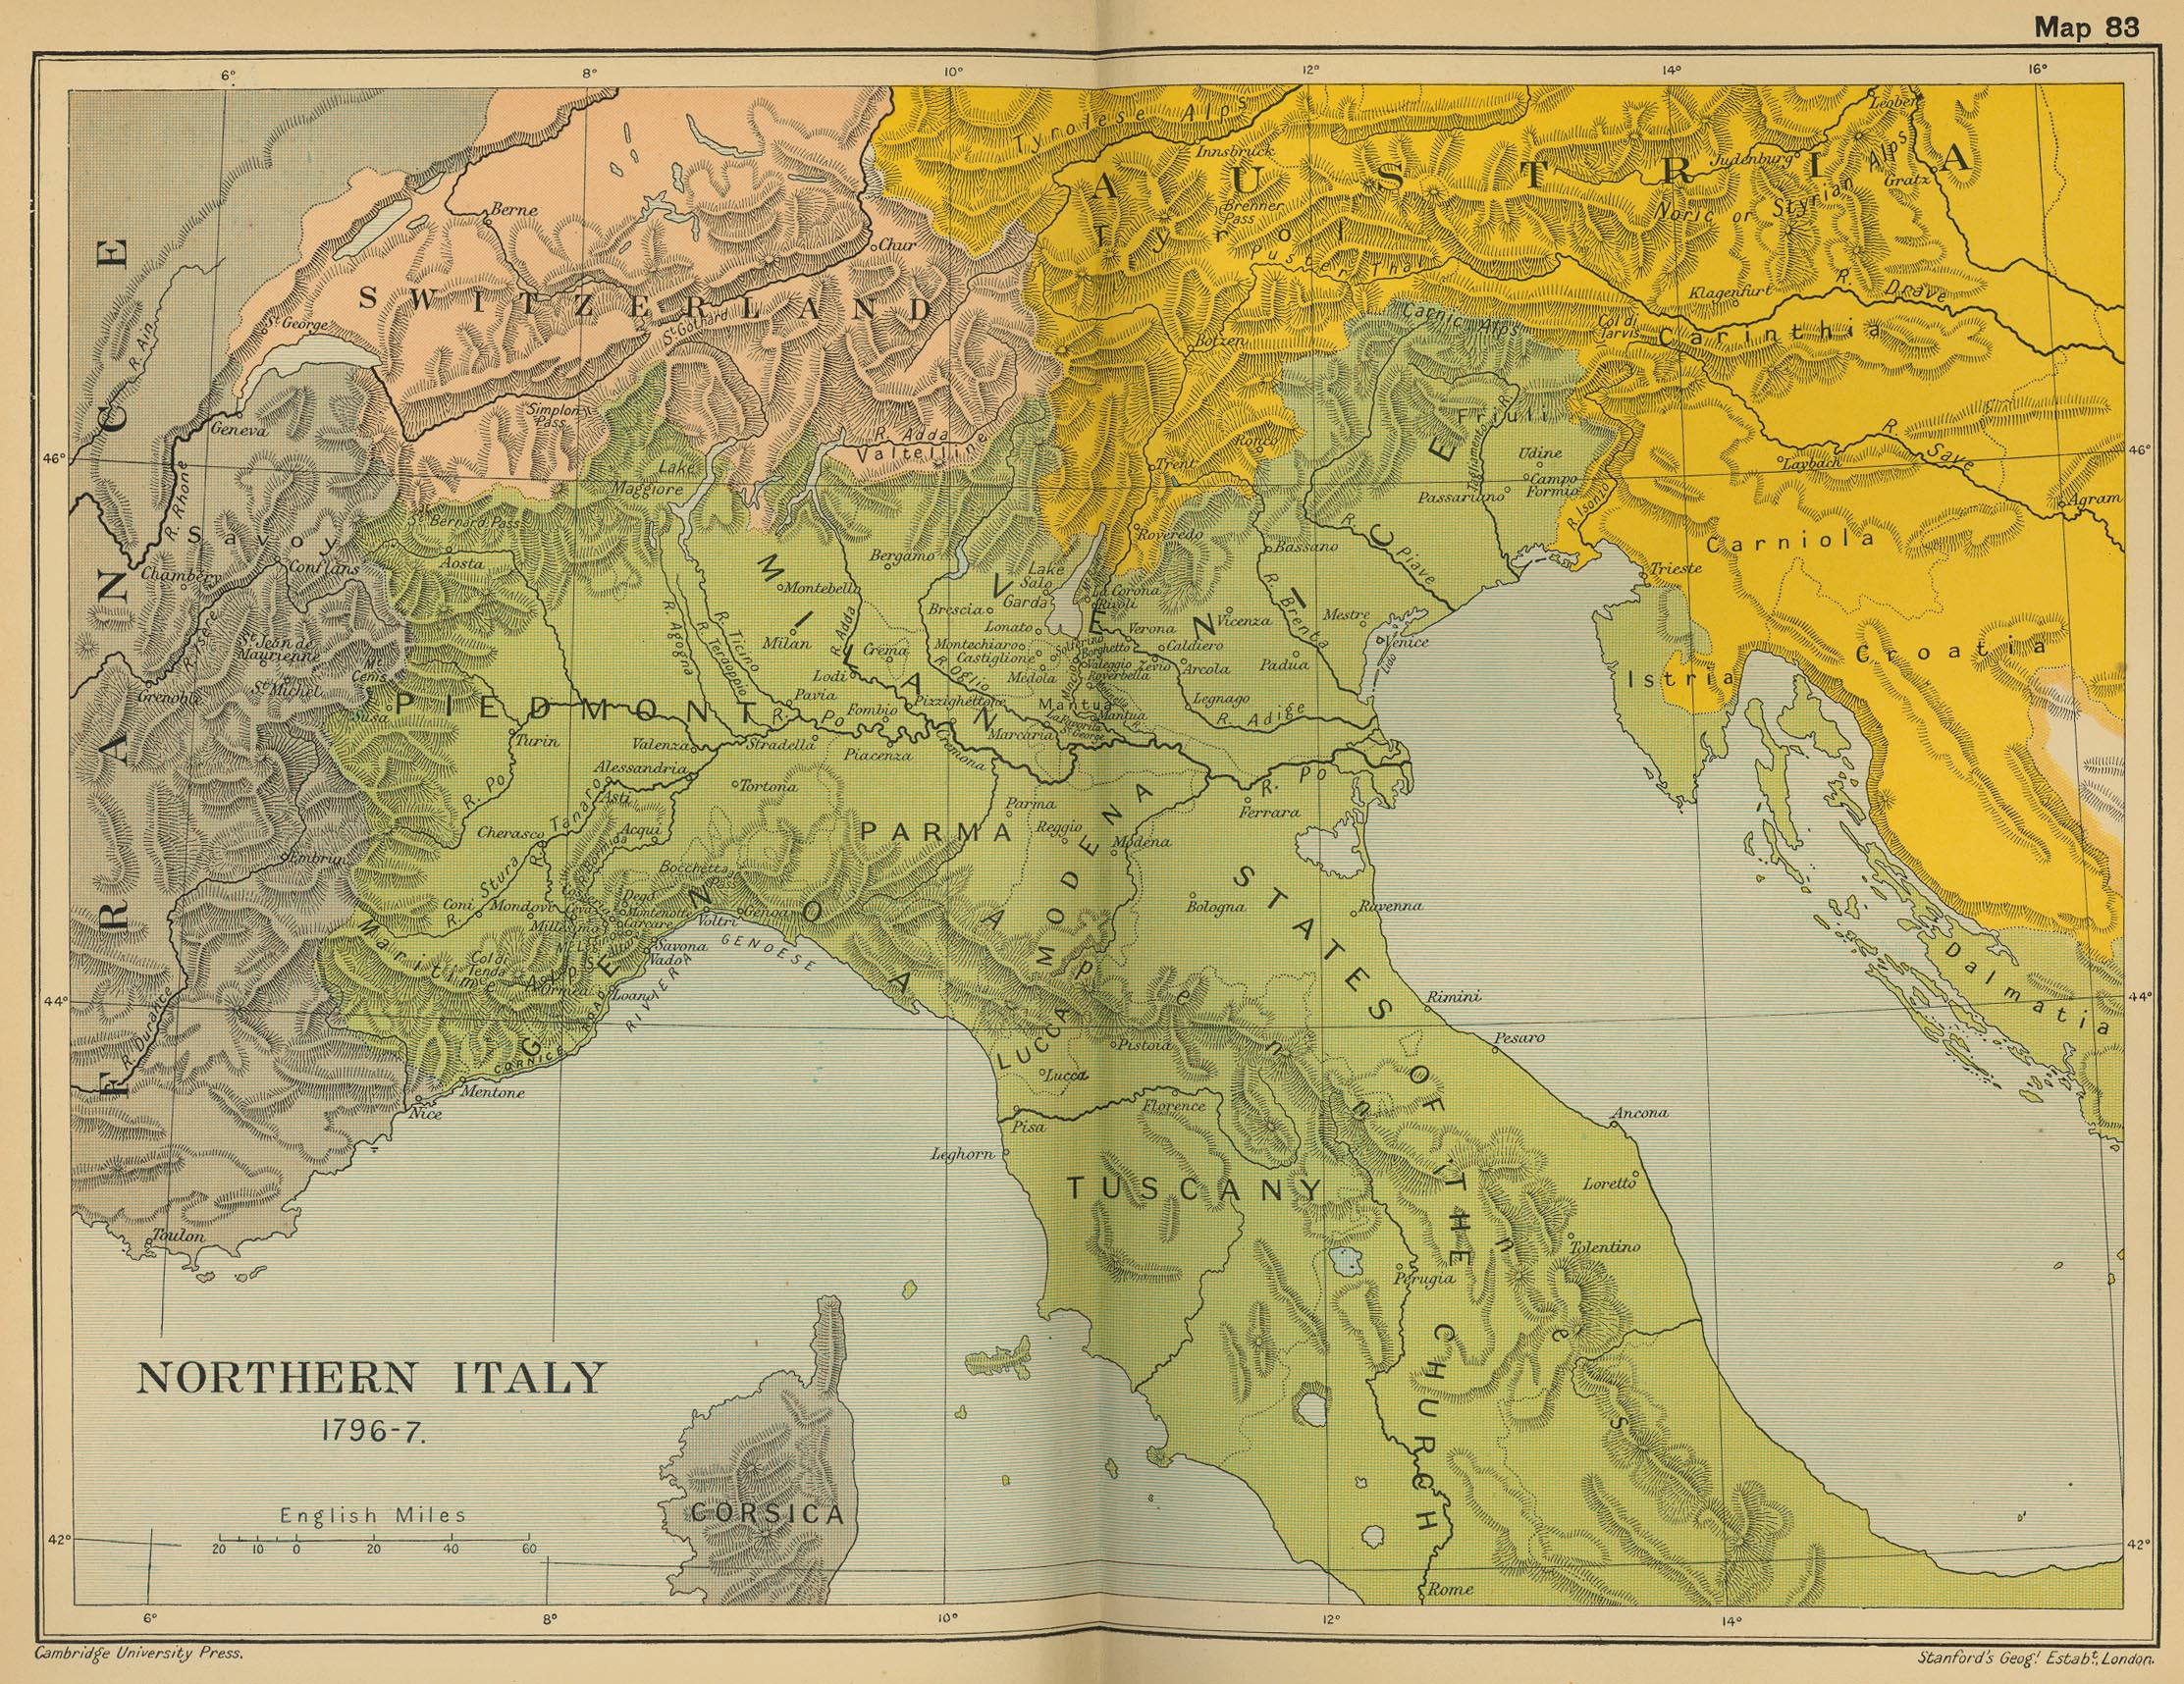 Map of Northern Italy 1796-1797